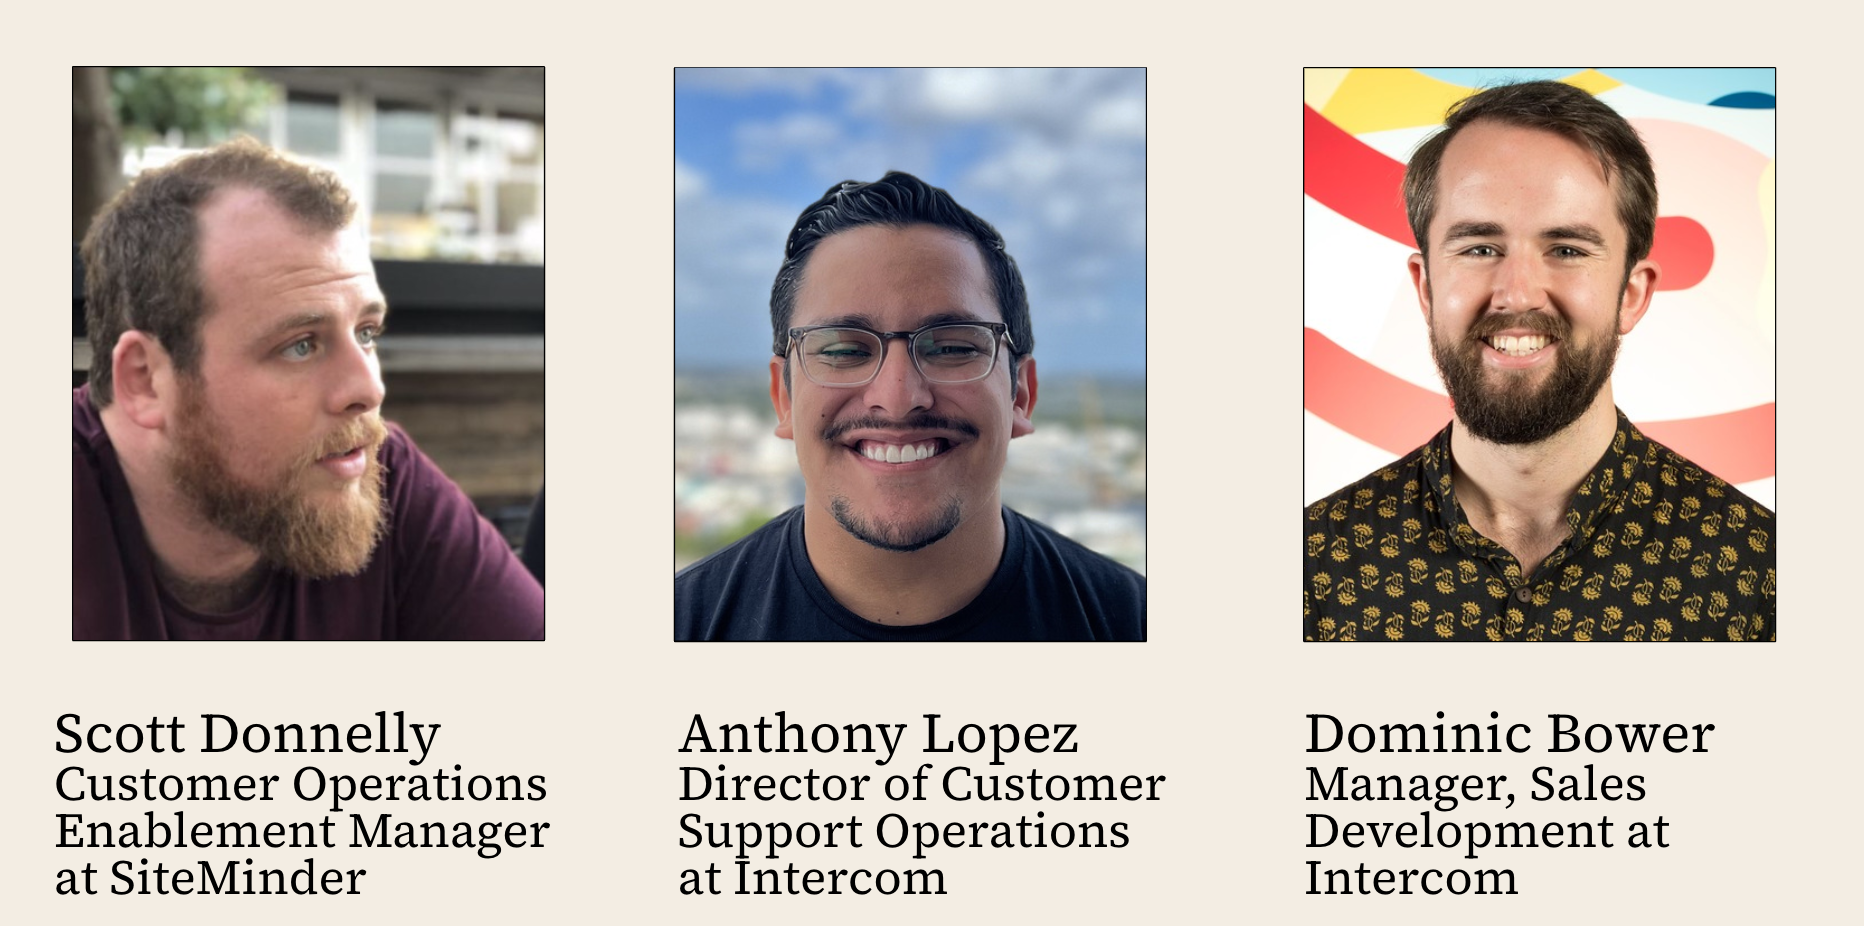 Customer service trends webinar panel: Scott Donnelly, Customer Operations Enablement Manager at SiteMinder, Anthony Lopez, Director of Customer Support Operations at Intercom, and Dominic Bower, Manager, Sales Development at Intercom. 